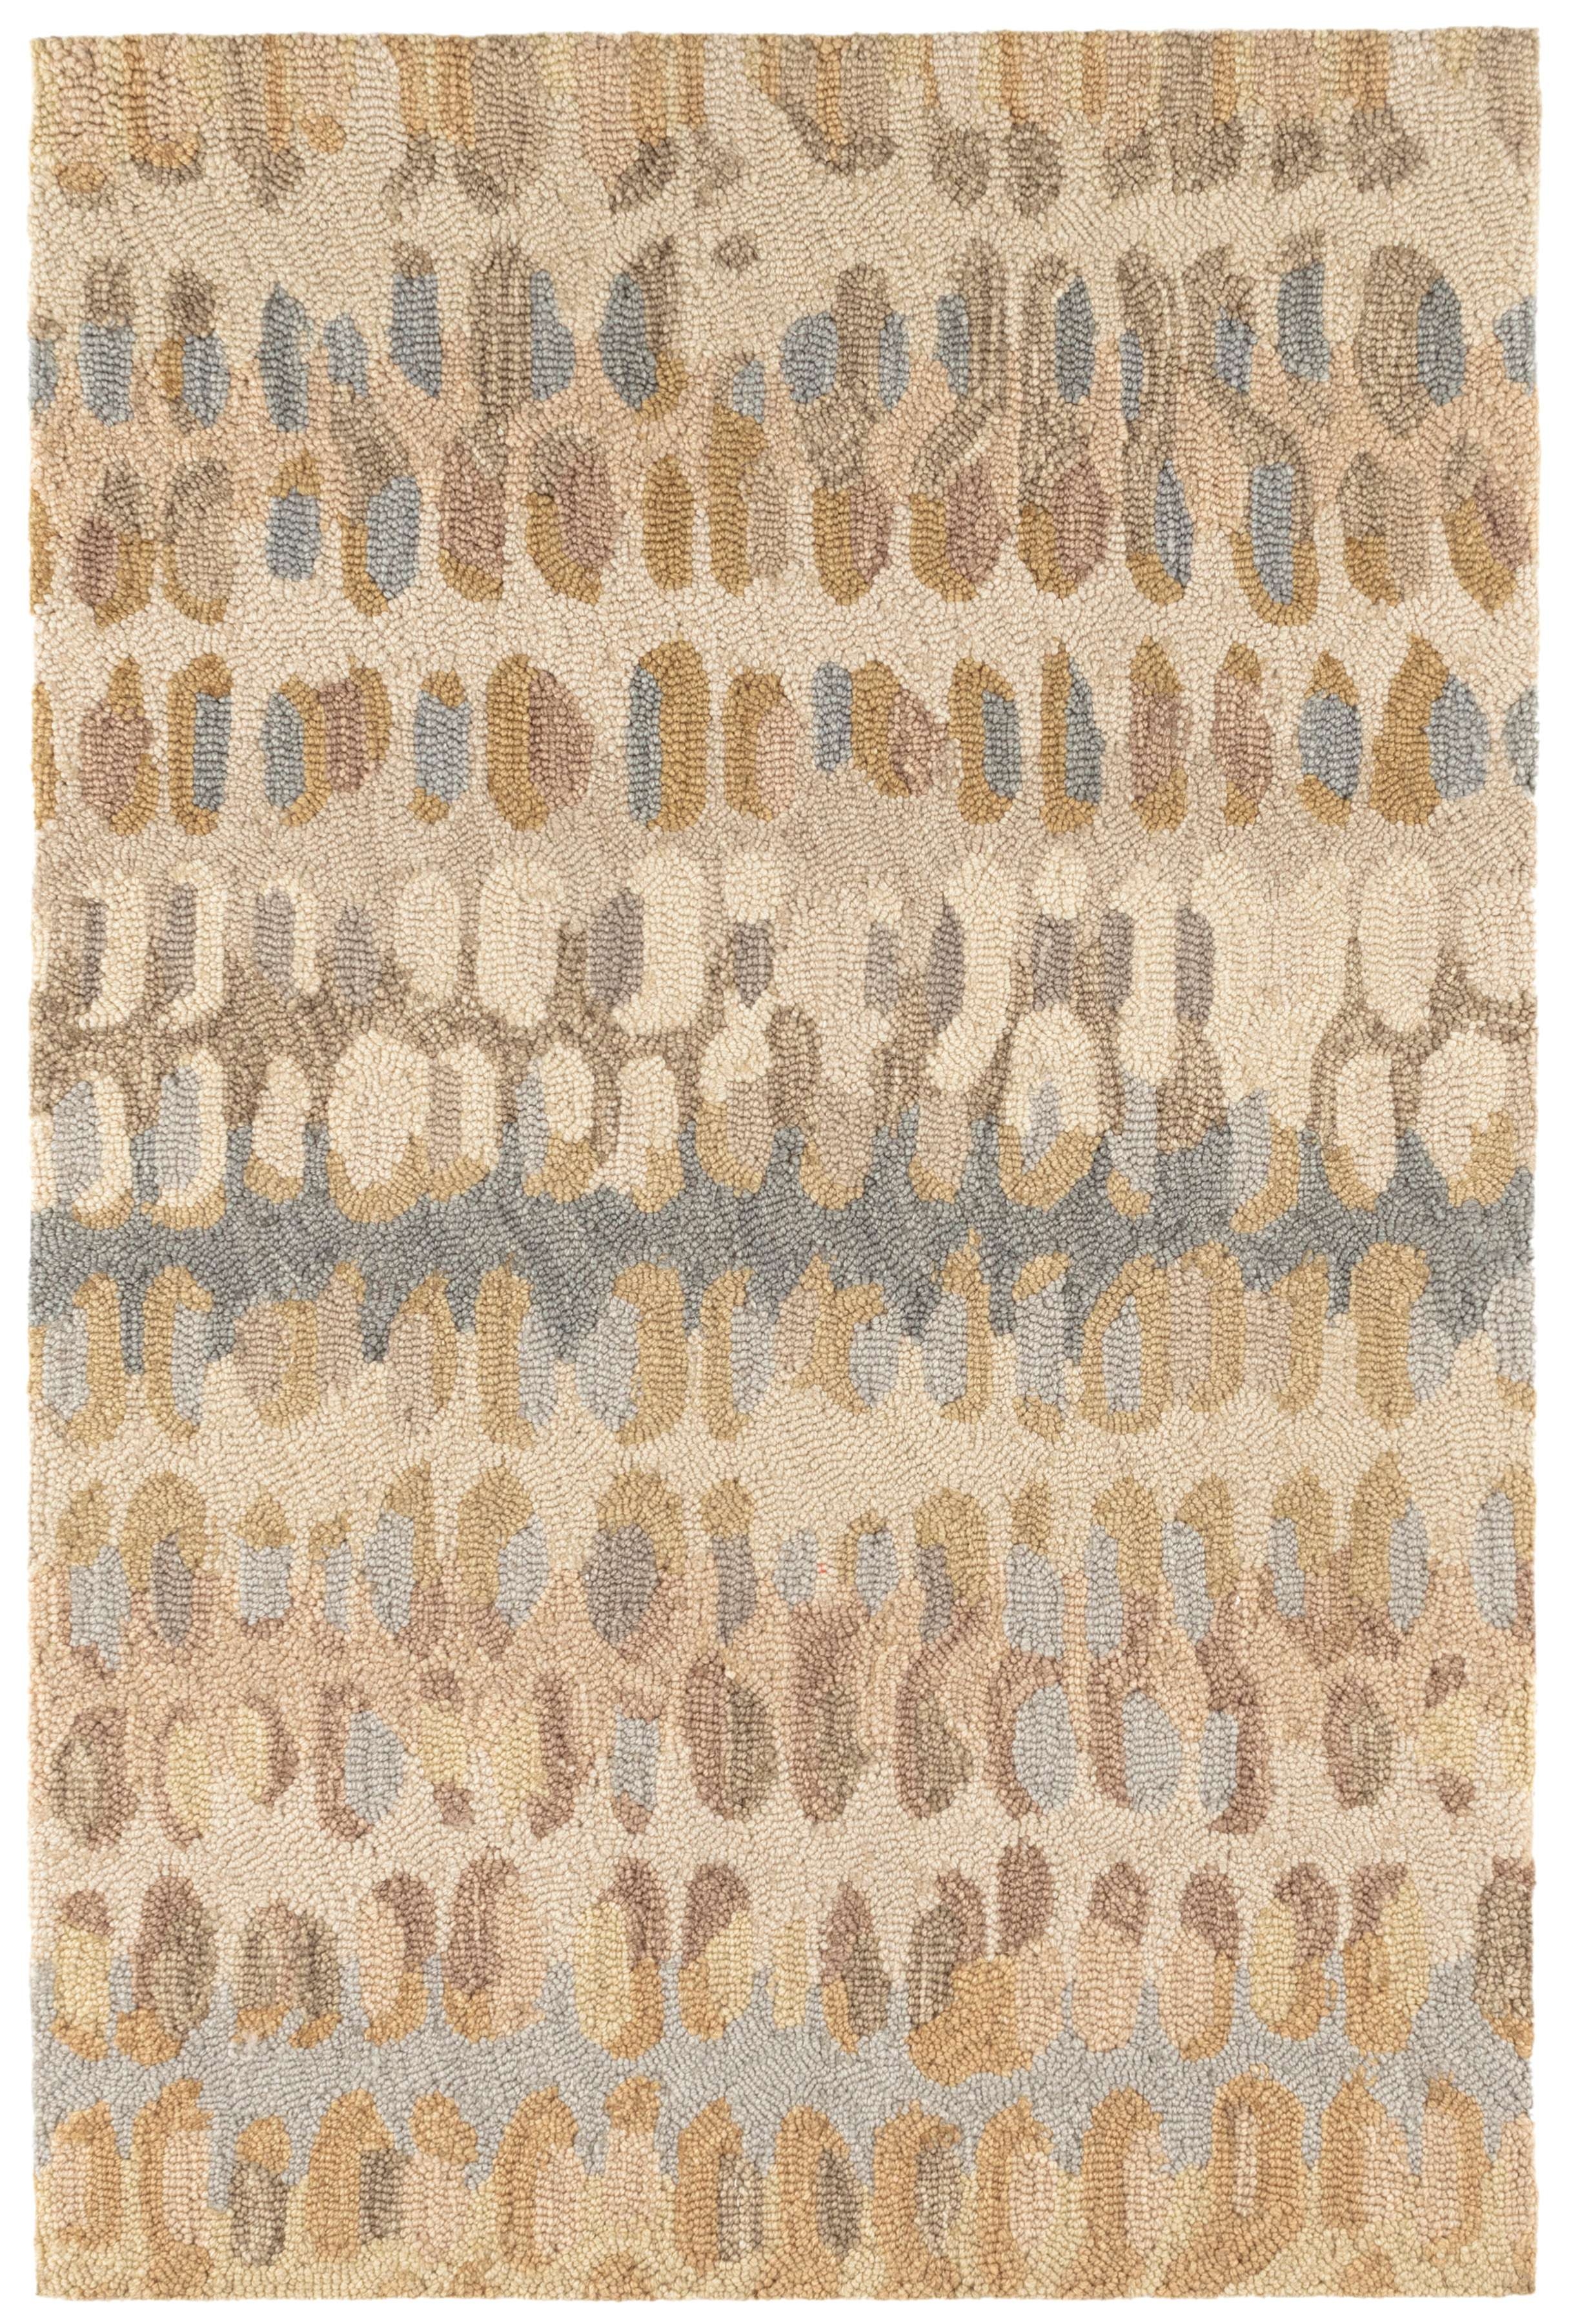 Paint Chip Natural Hand Micro Hooked Wool Rug - Image 0